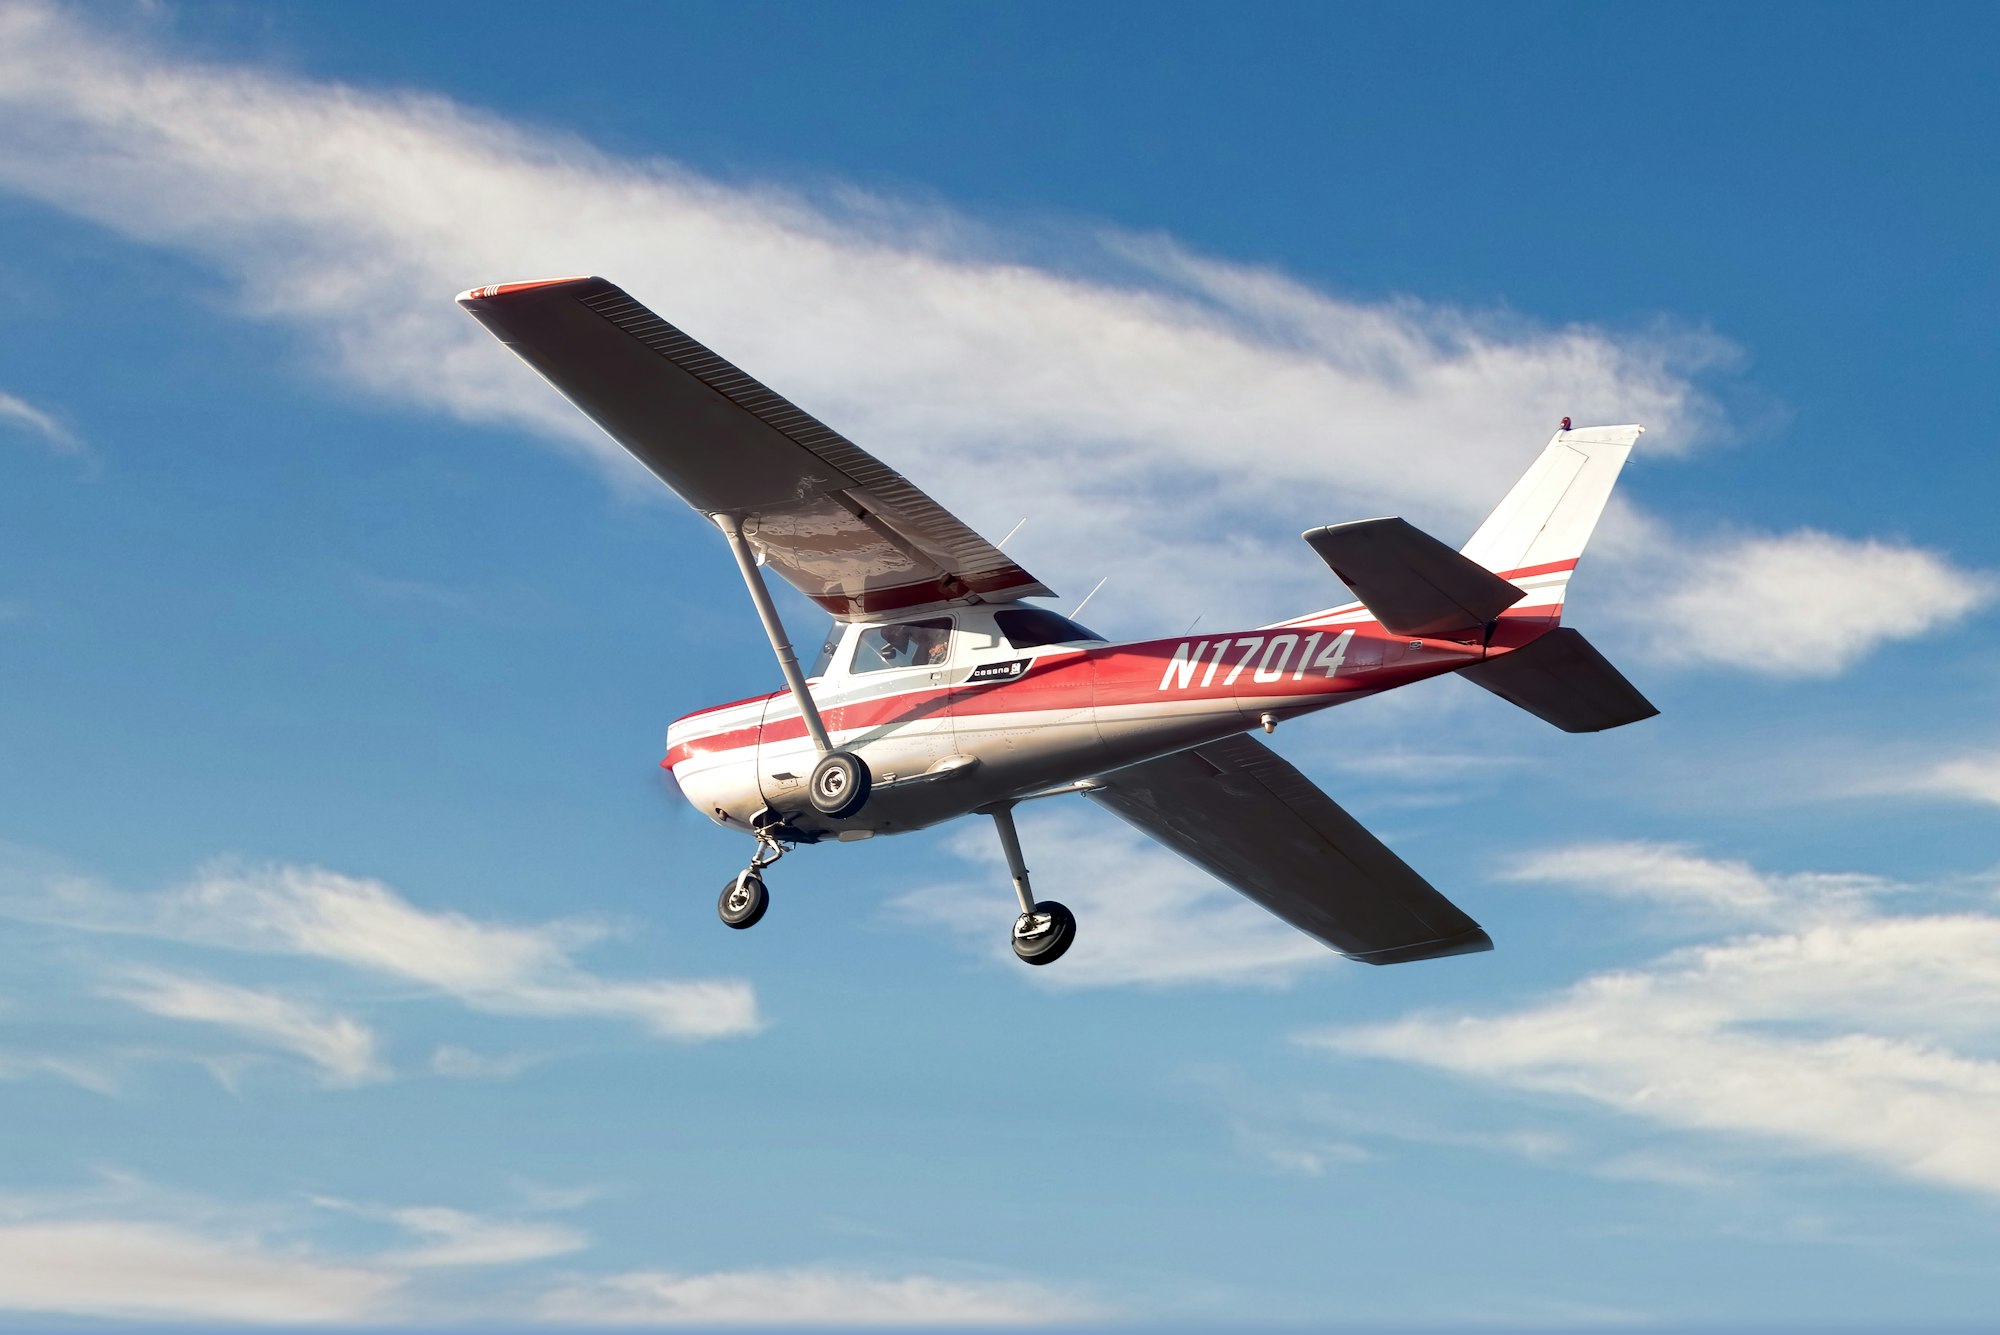 CESSNA 150L
Fixed wing single engine